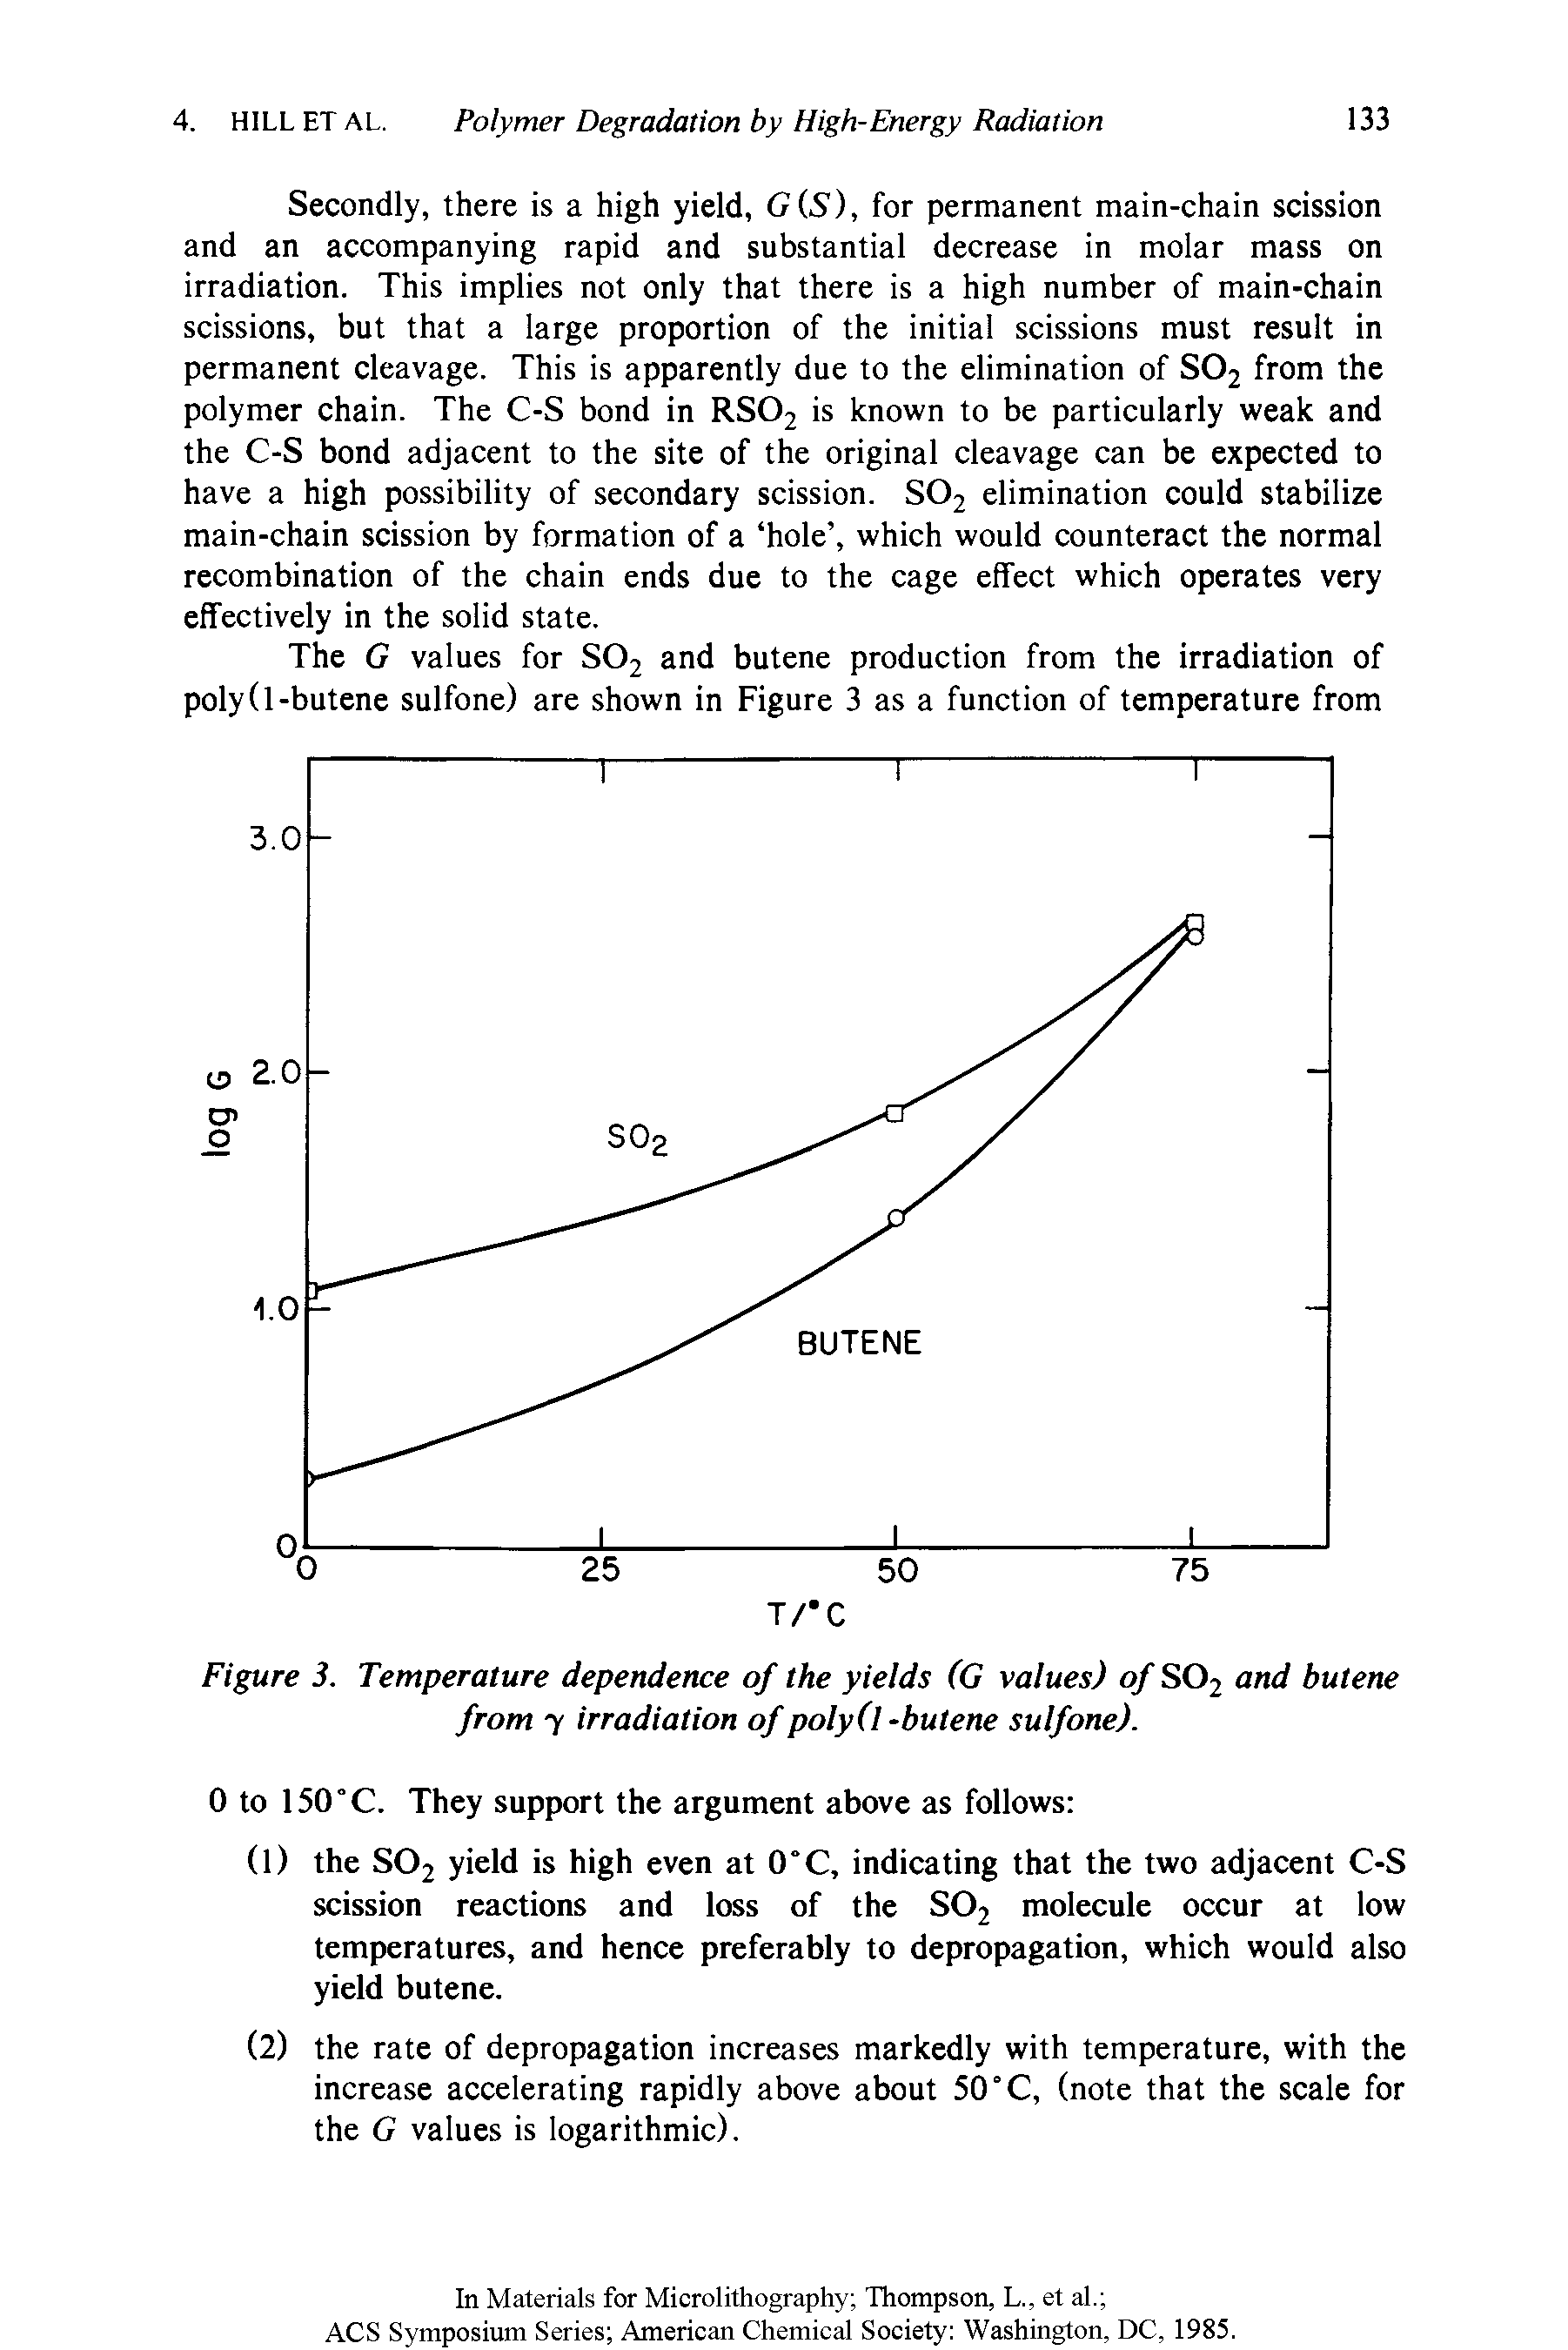 Figure 3. Temperature dependence of the yields (G values) of S02 and butene from 7 irradiation of poly (1 -butene sulfone).